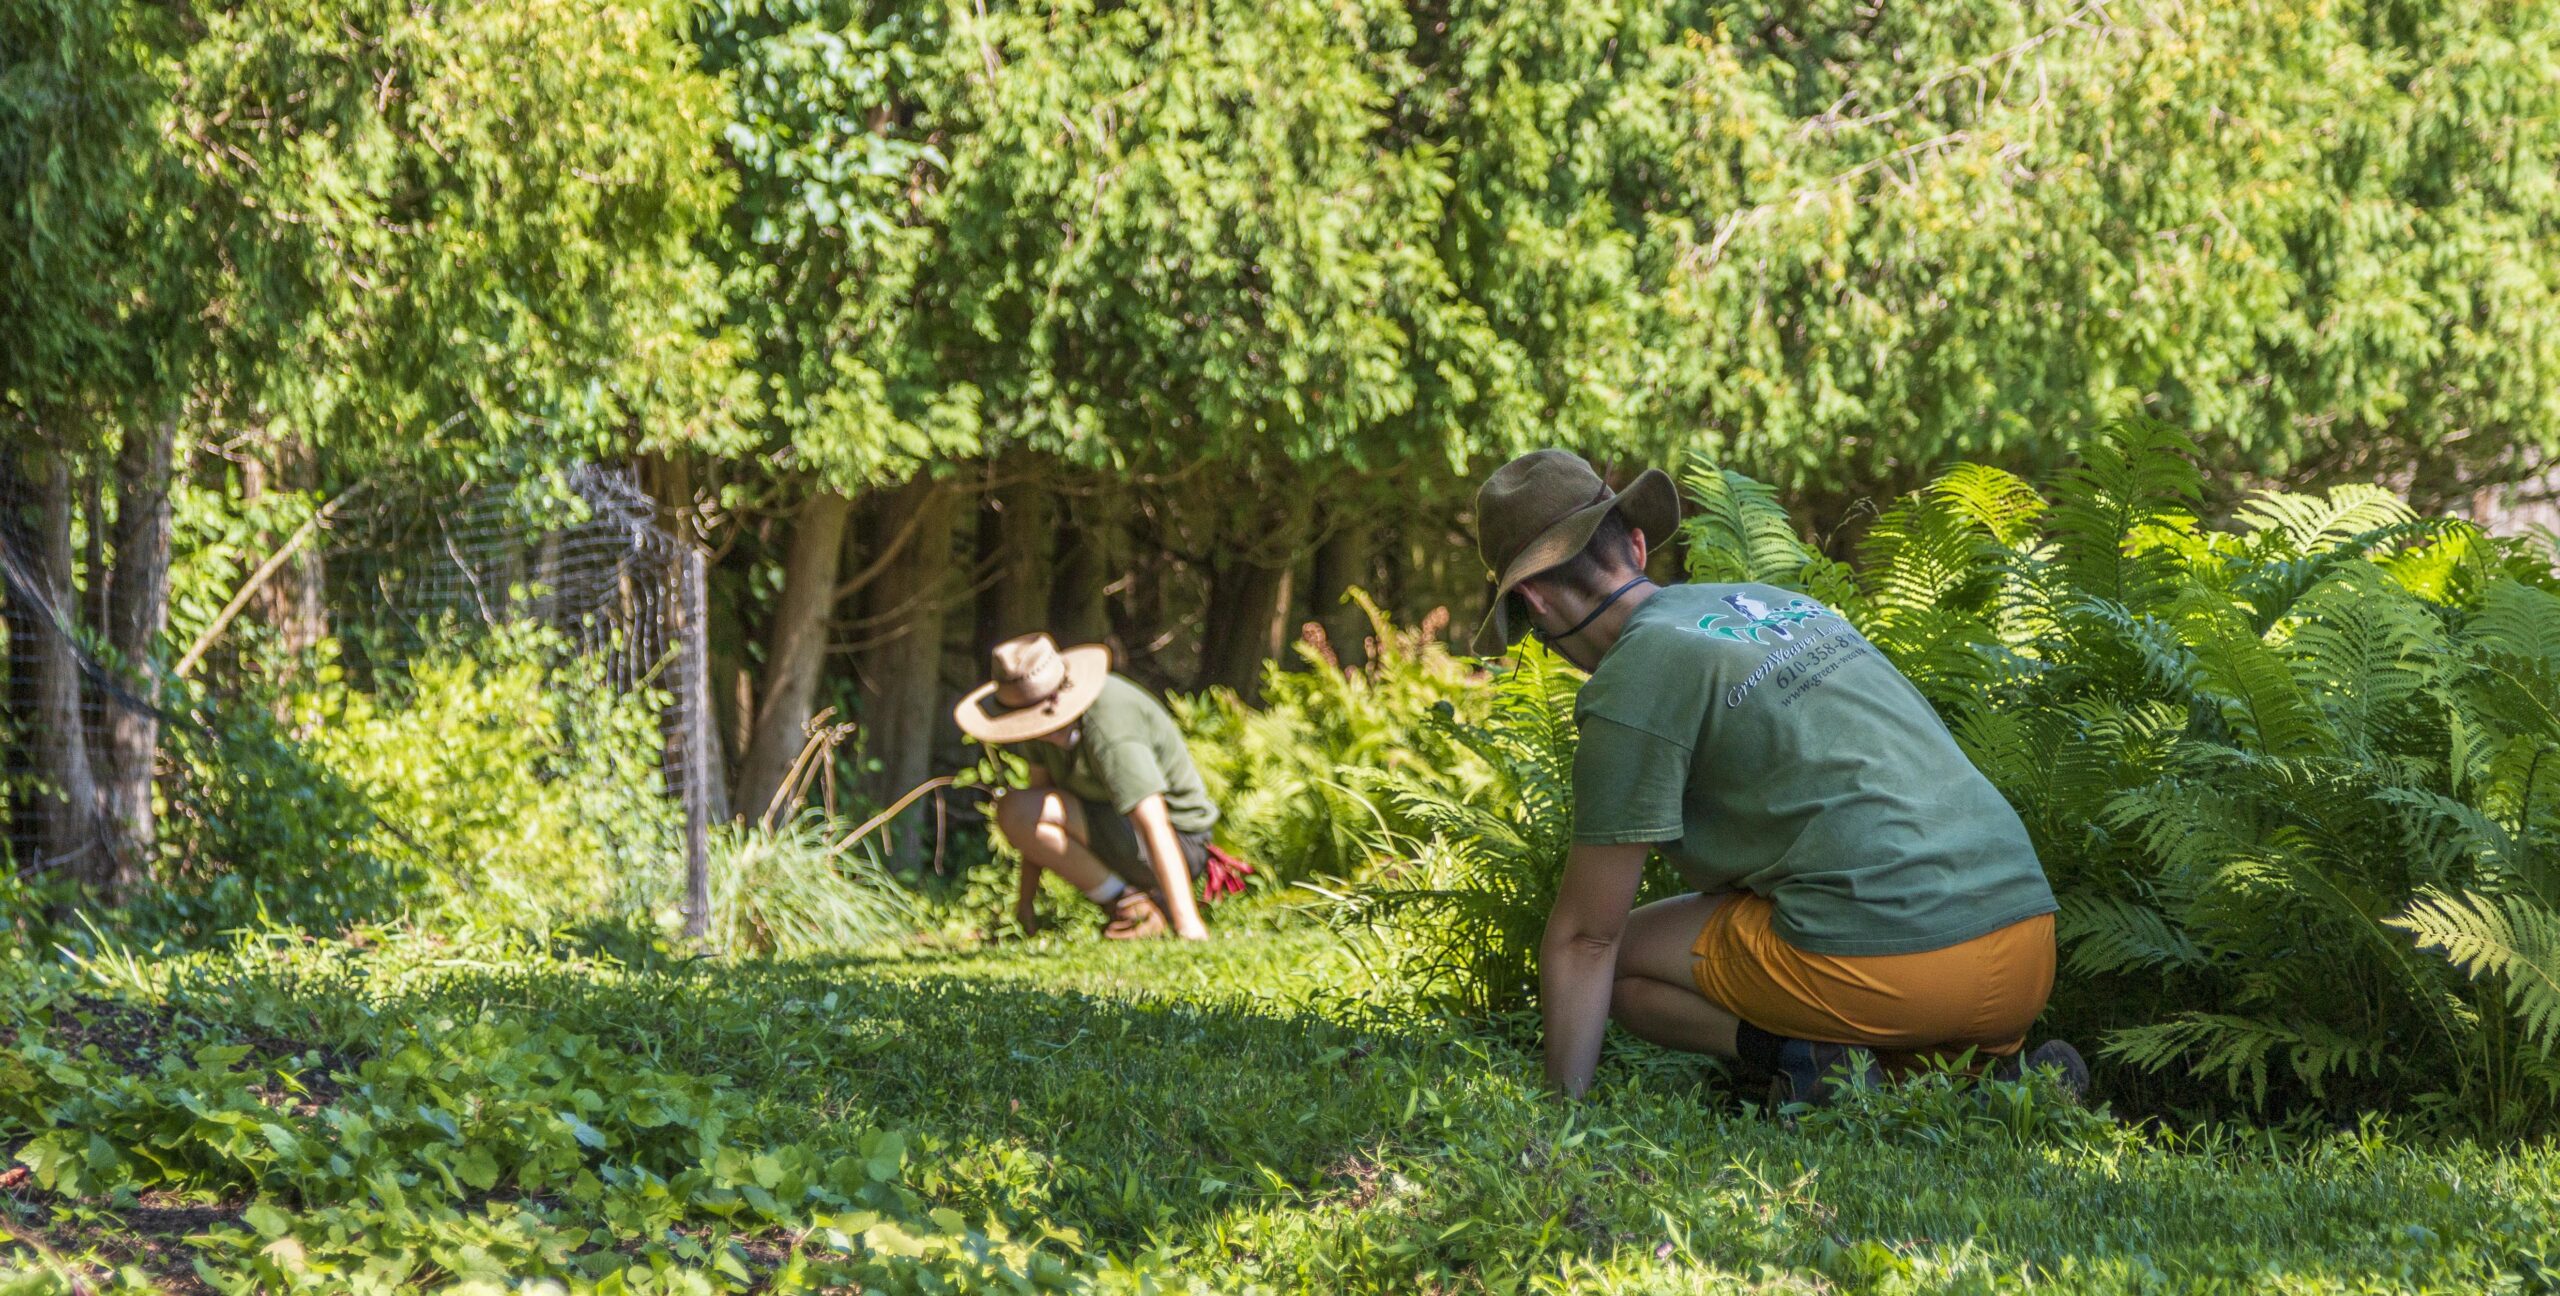 Professional gardeners use tricks of the trade to manage properties efficiently. Photo by Nick Yates.